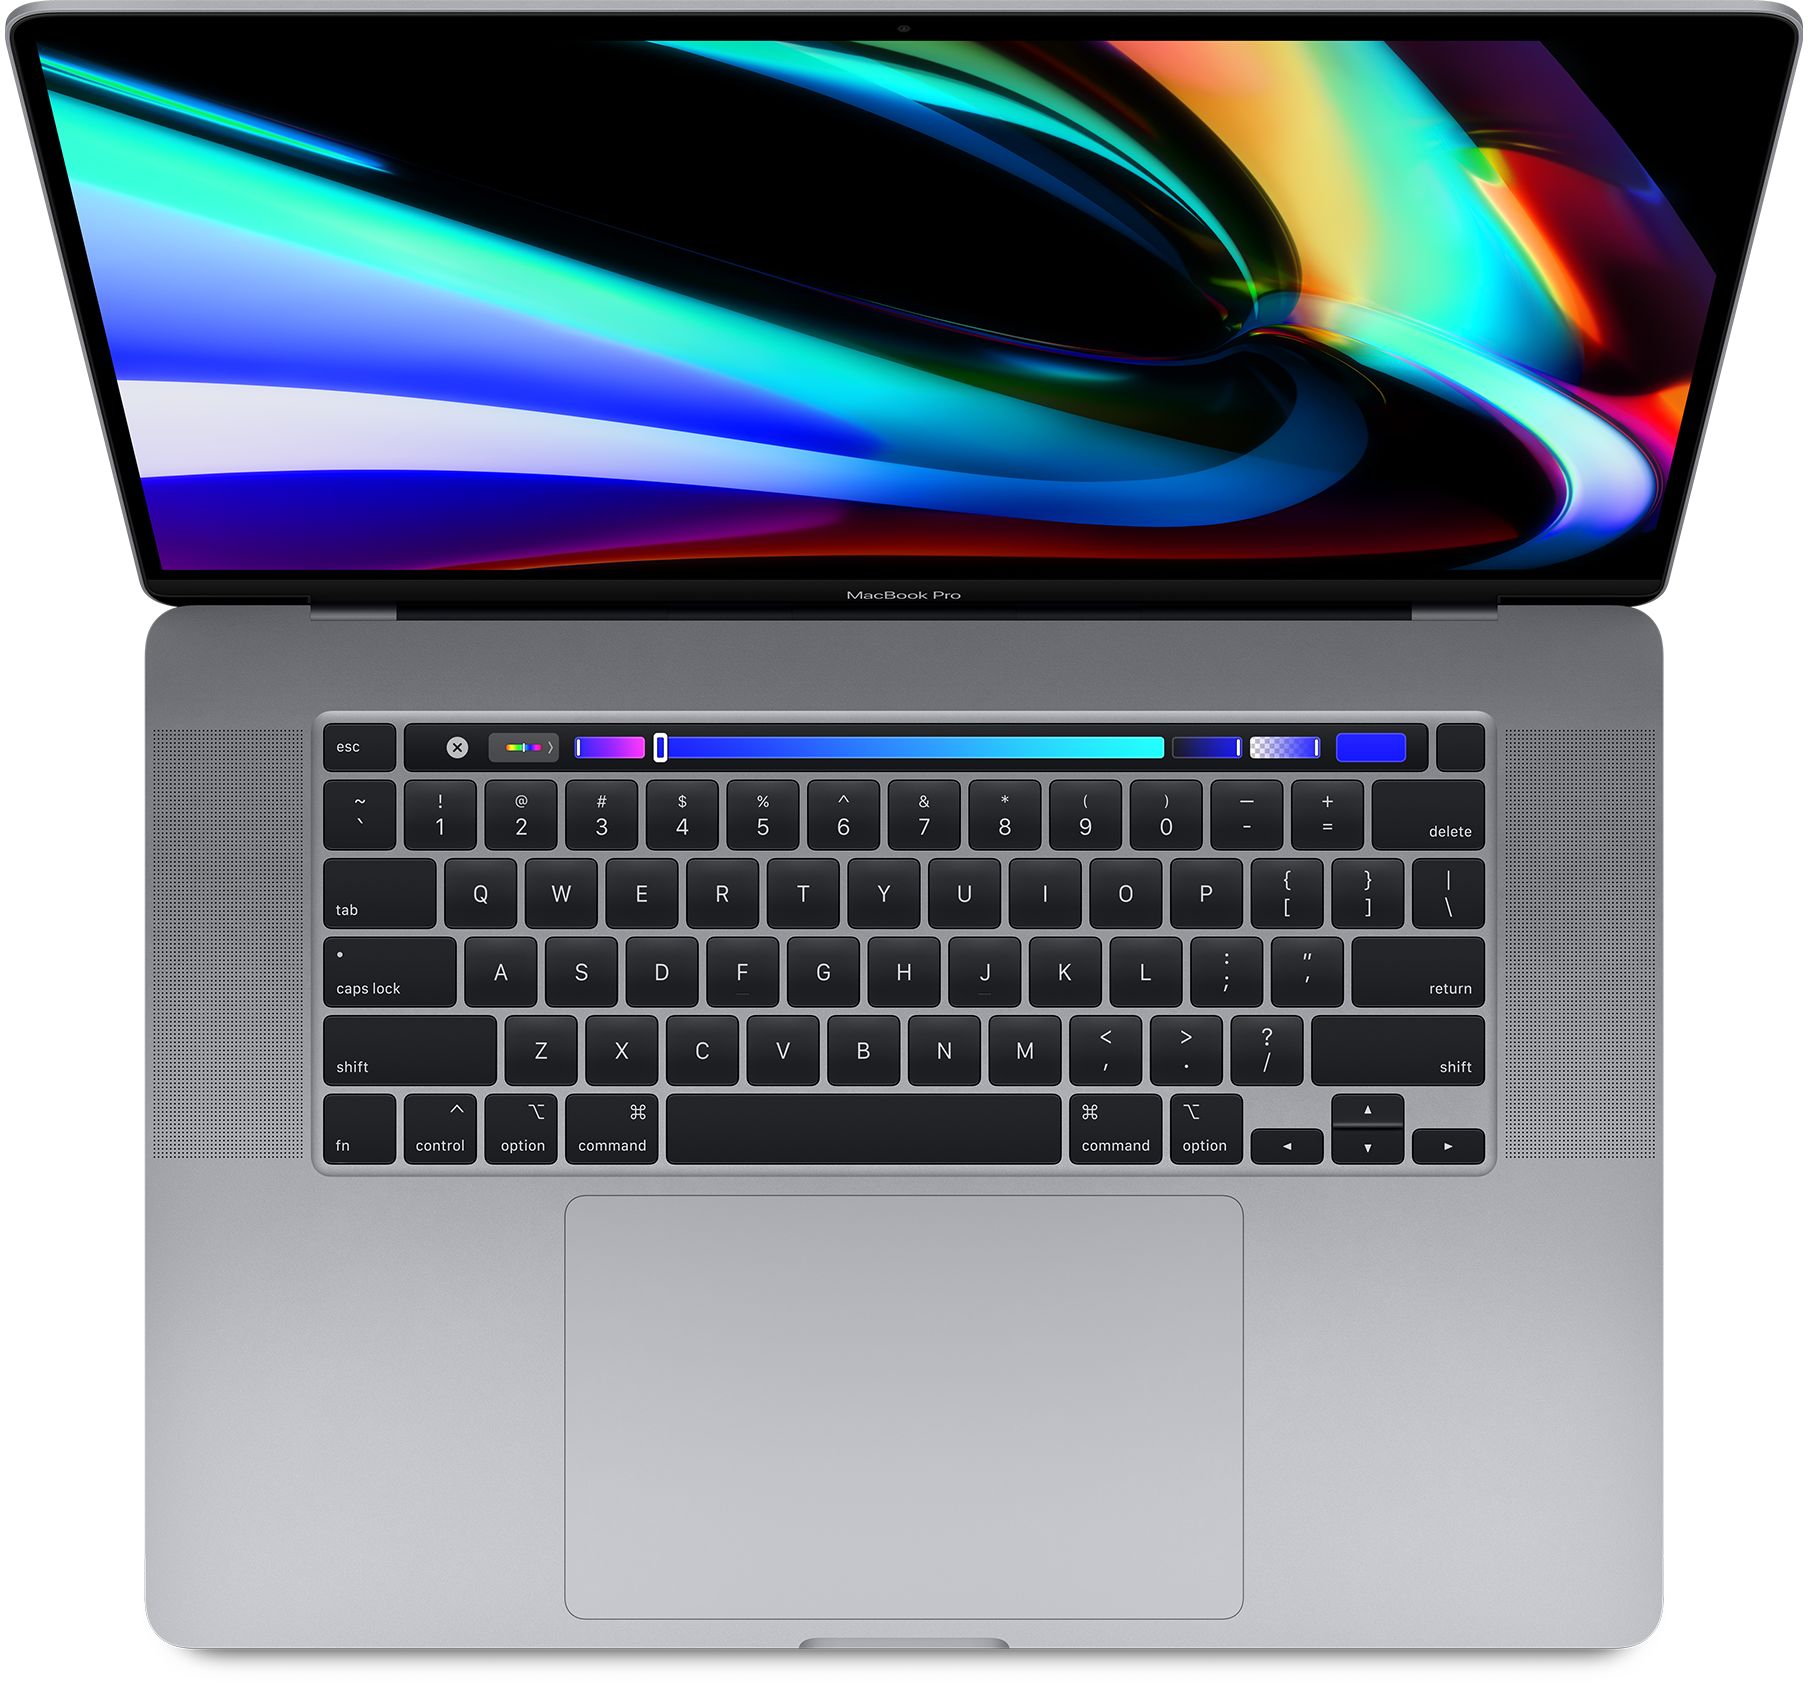 Apple Mbp 15.4 Sl 2.8Ghz Rp555 256Gb APL-MPTU2LL/A - Click Image to Close